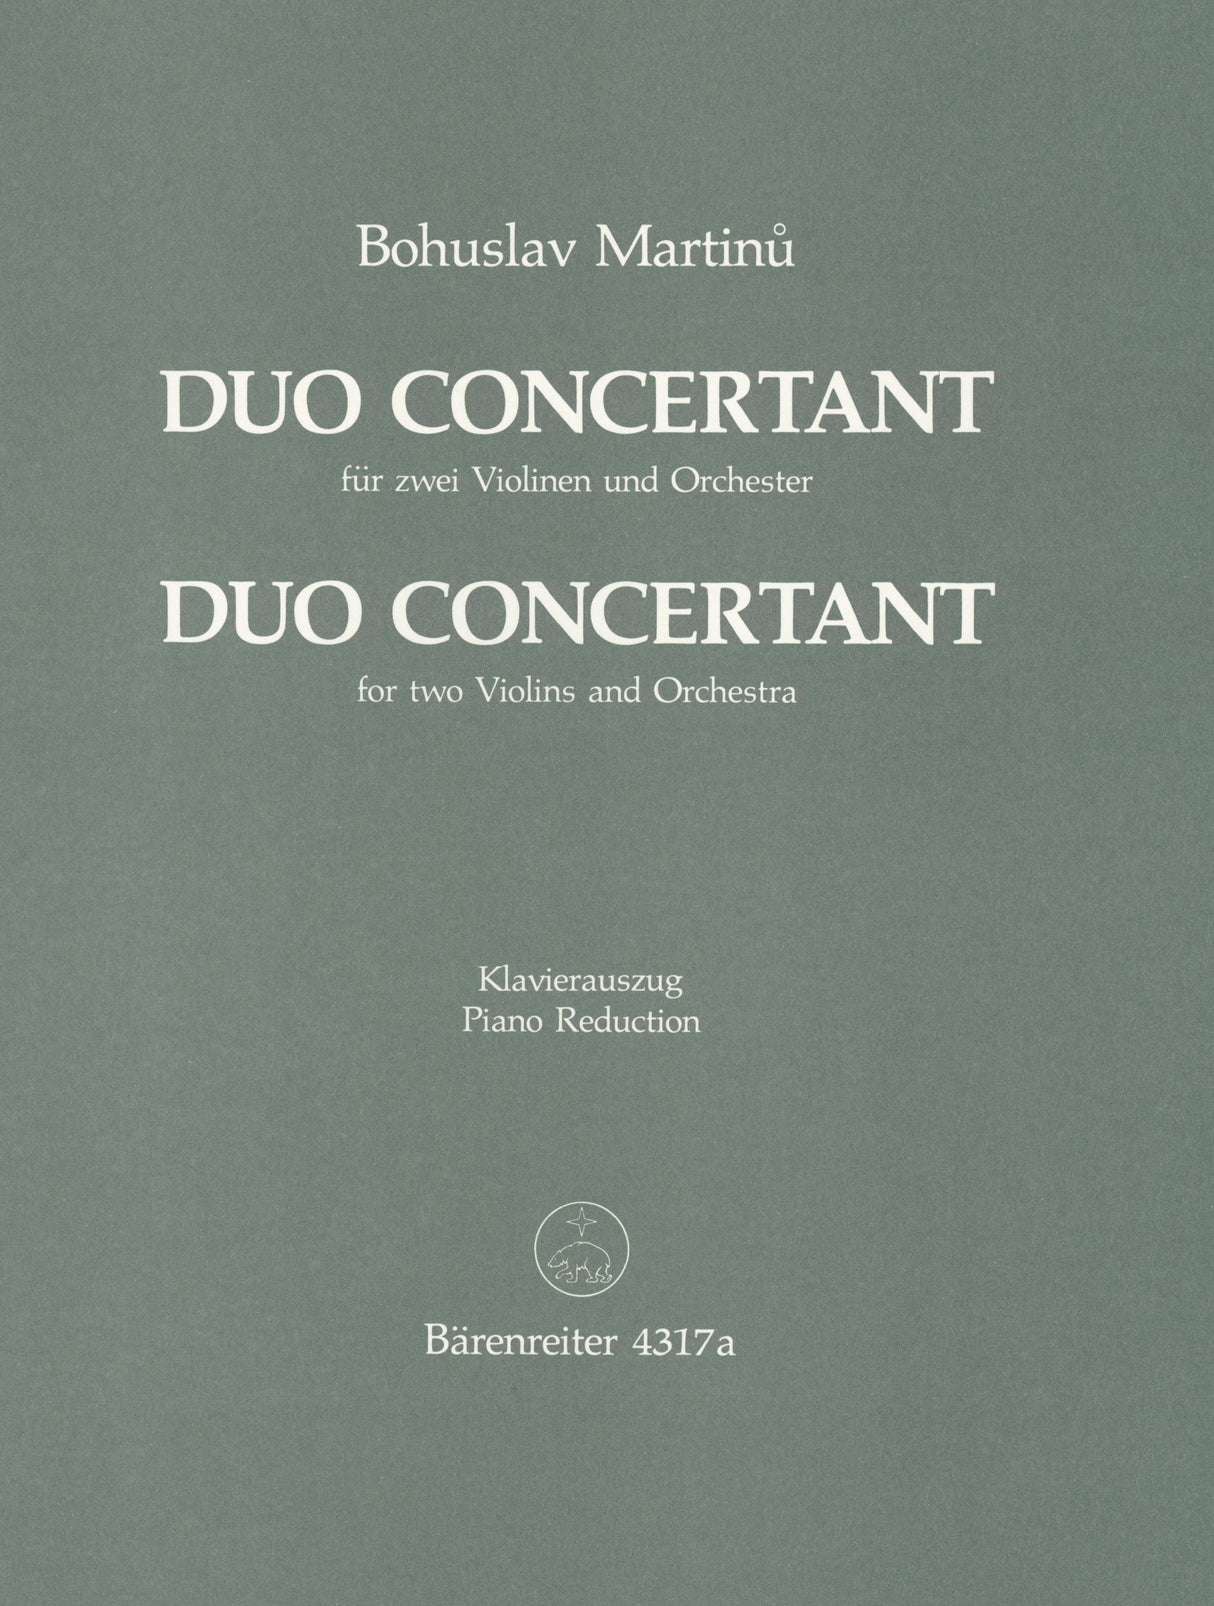 Martinů: Duo Concertant for 2 Violins and Orchestra